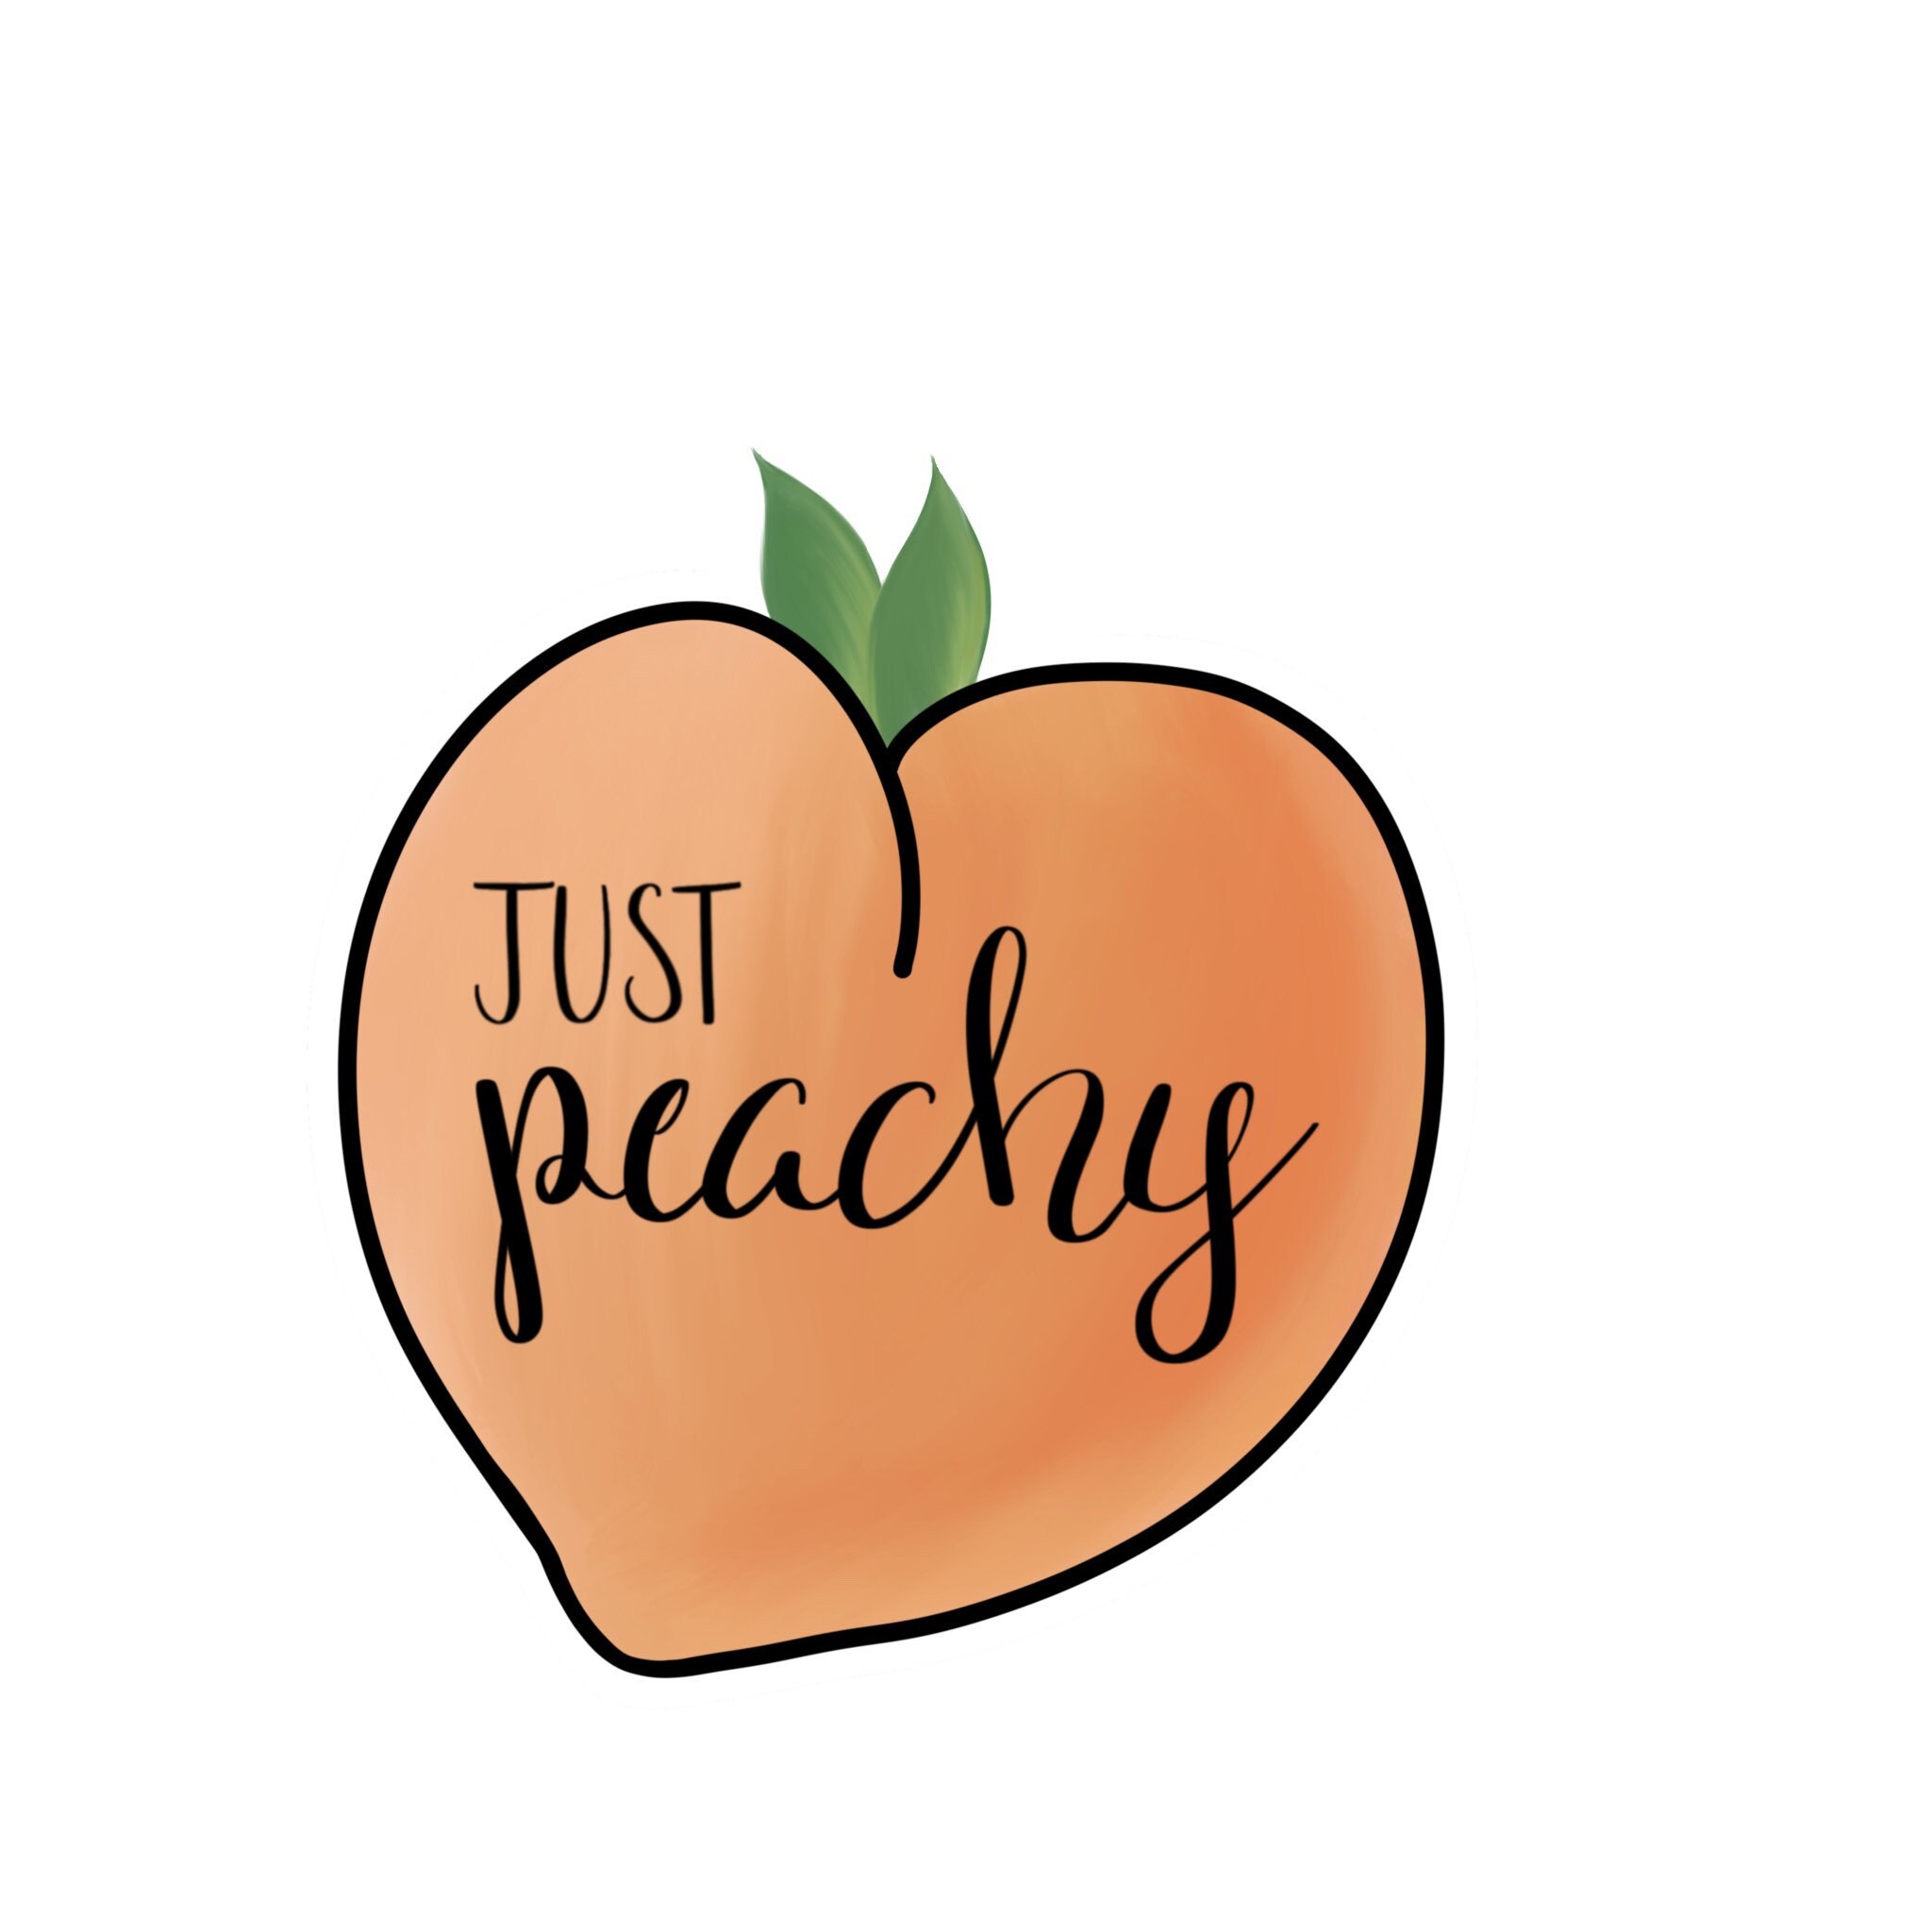 Just Peachy // Sticker design .png file for cricut DIGITAL | Etsy